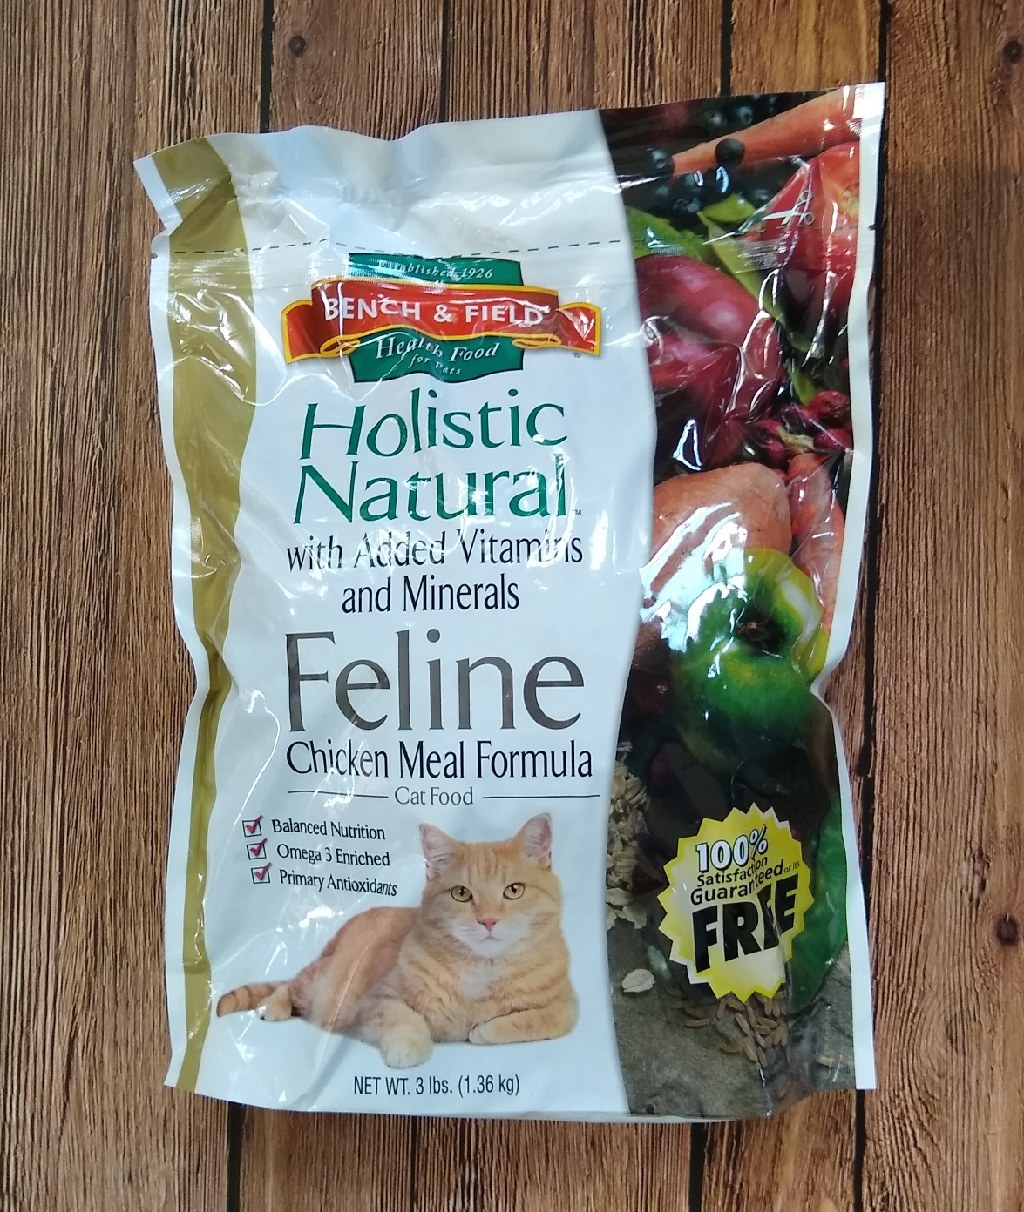 Picture of: Trader Joe’s: Bench & Field Holistic Natural Feline Chicken Meal